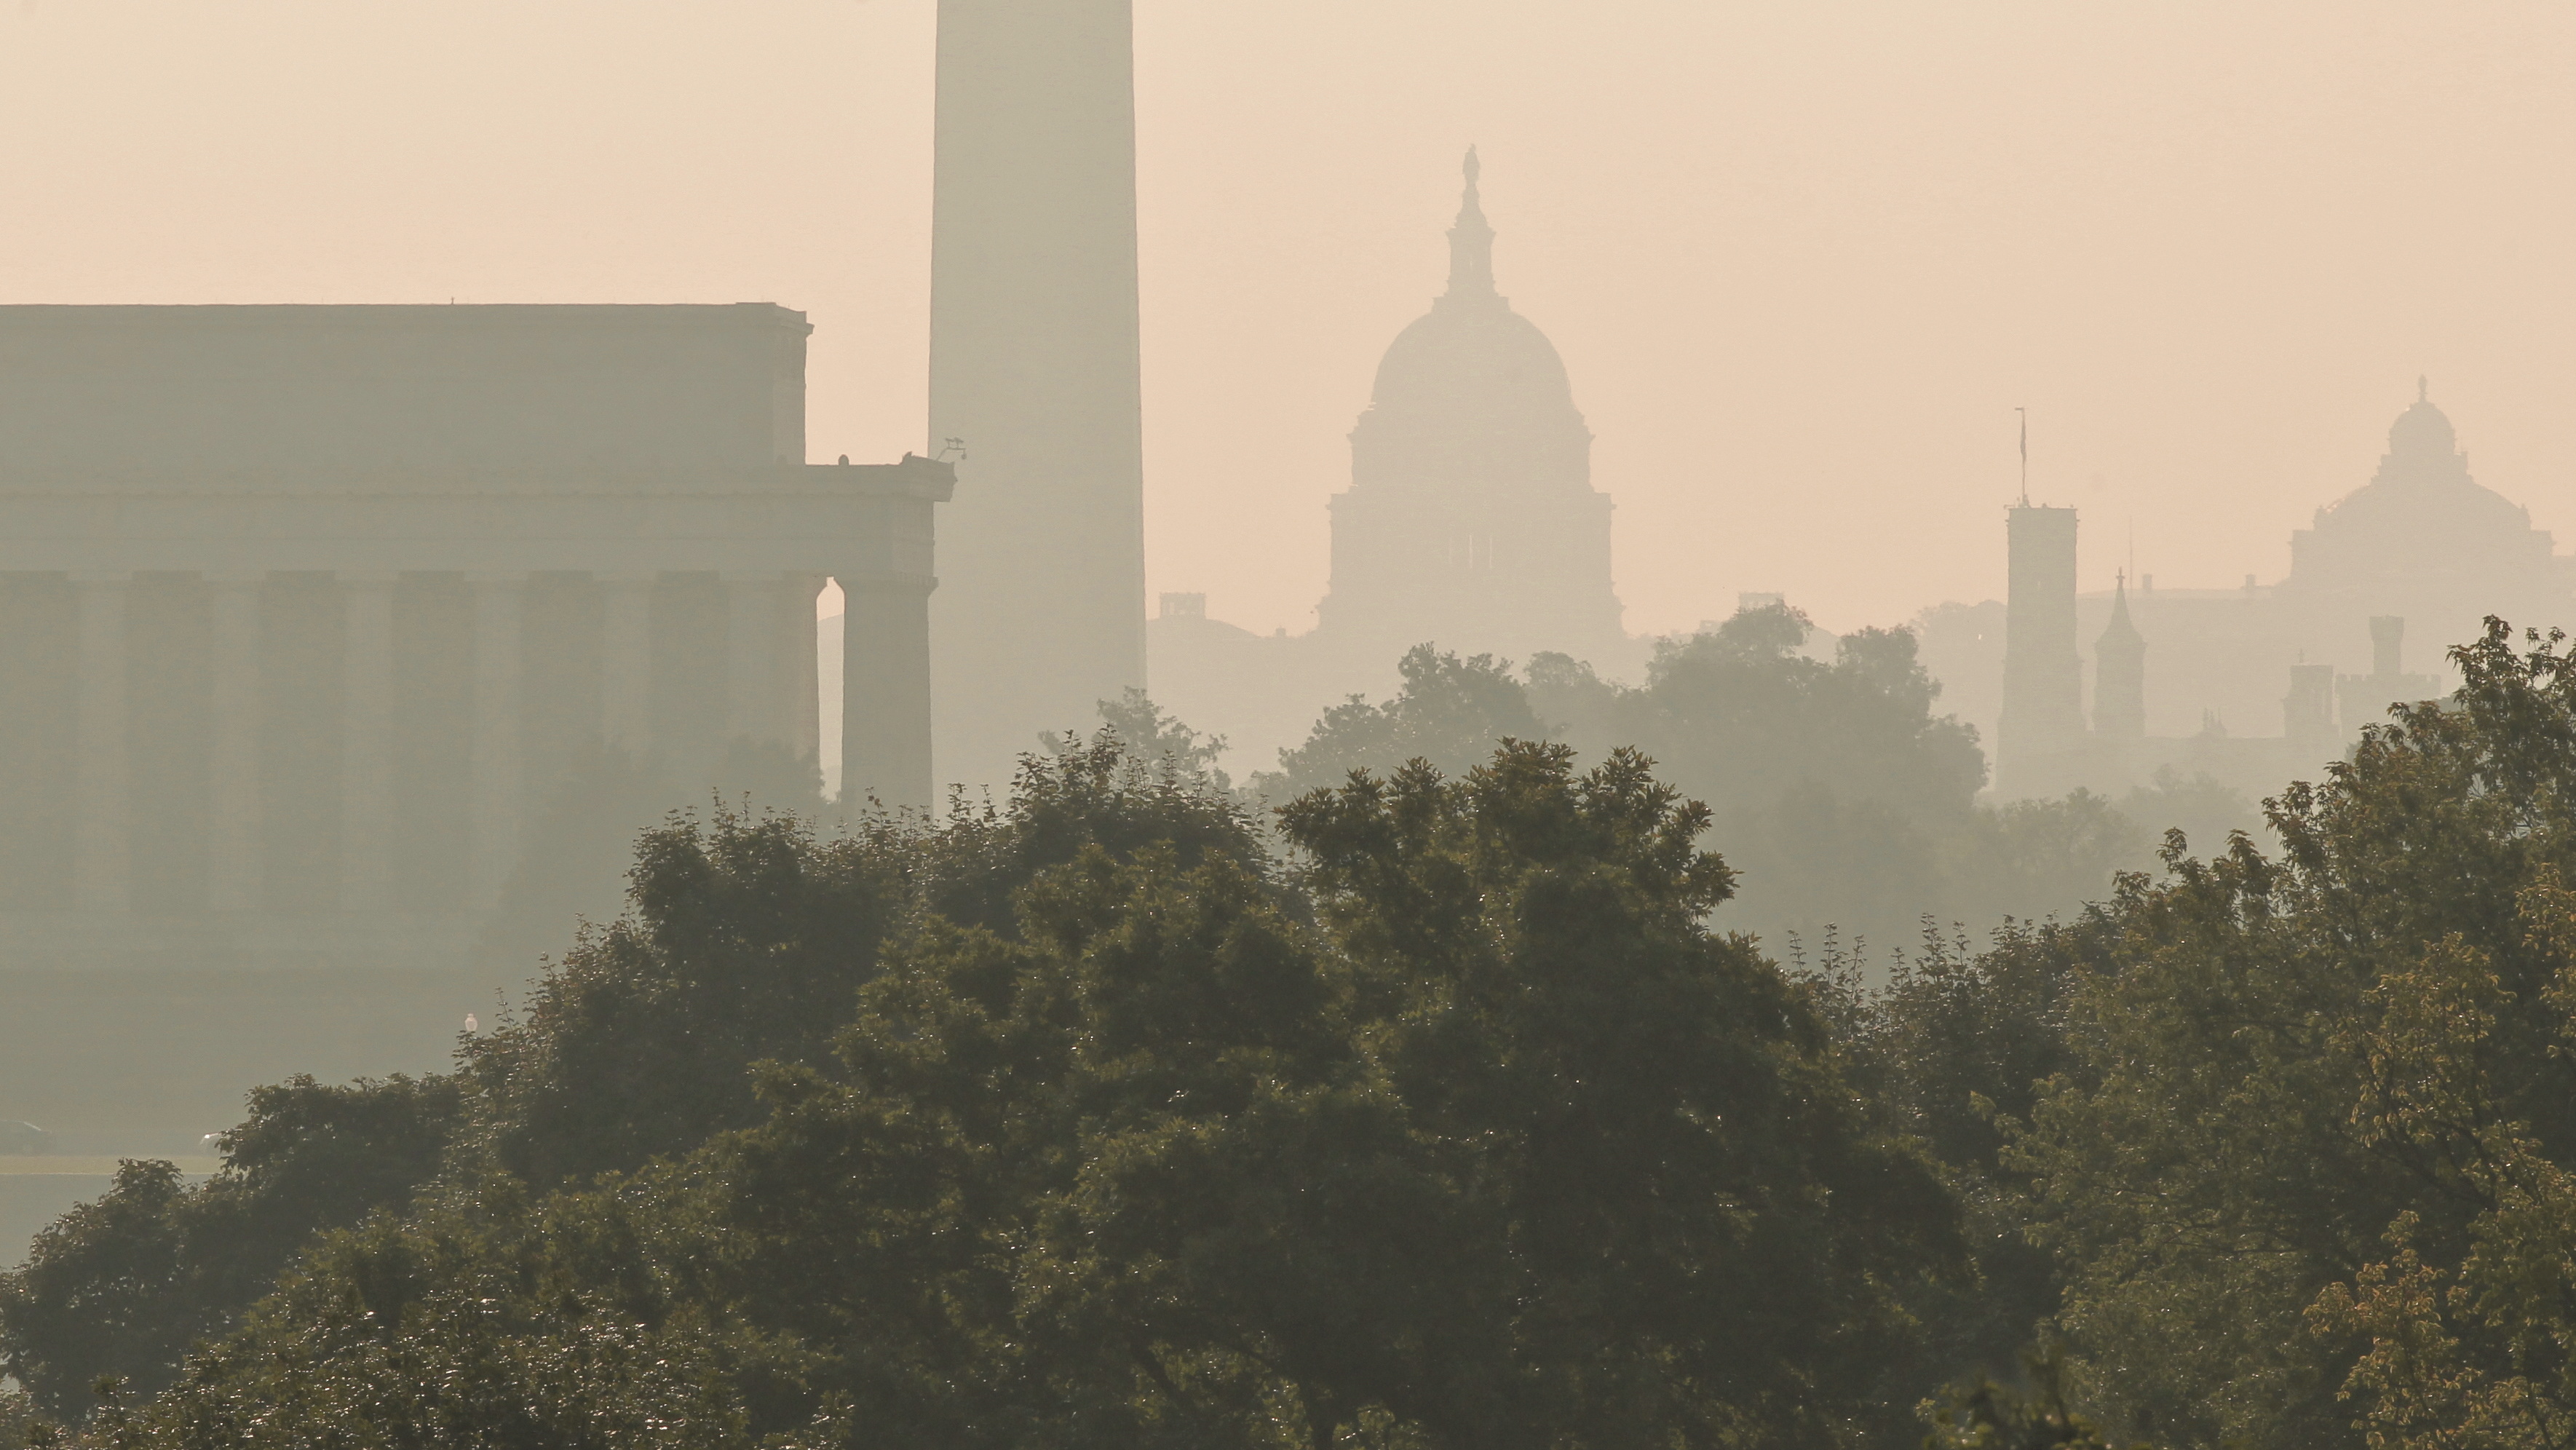 D.C. named one of the 10 most polluted cities in U.S.